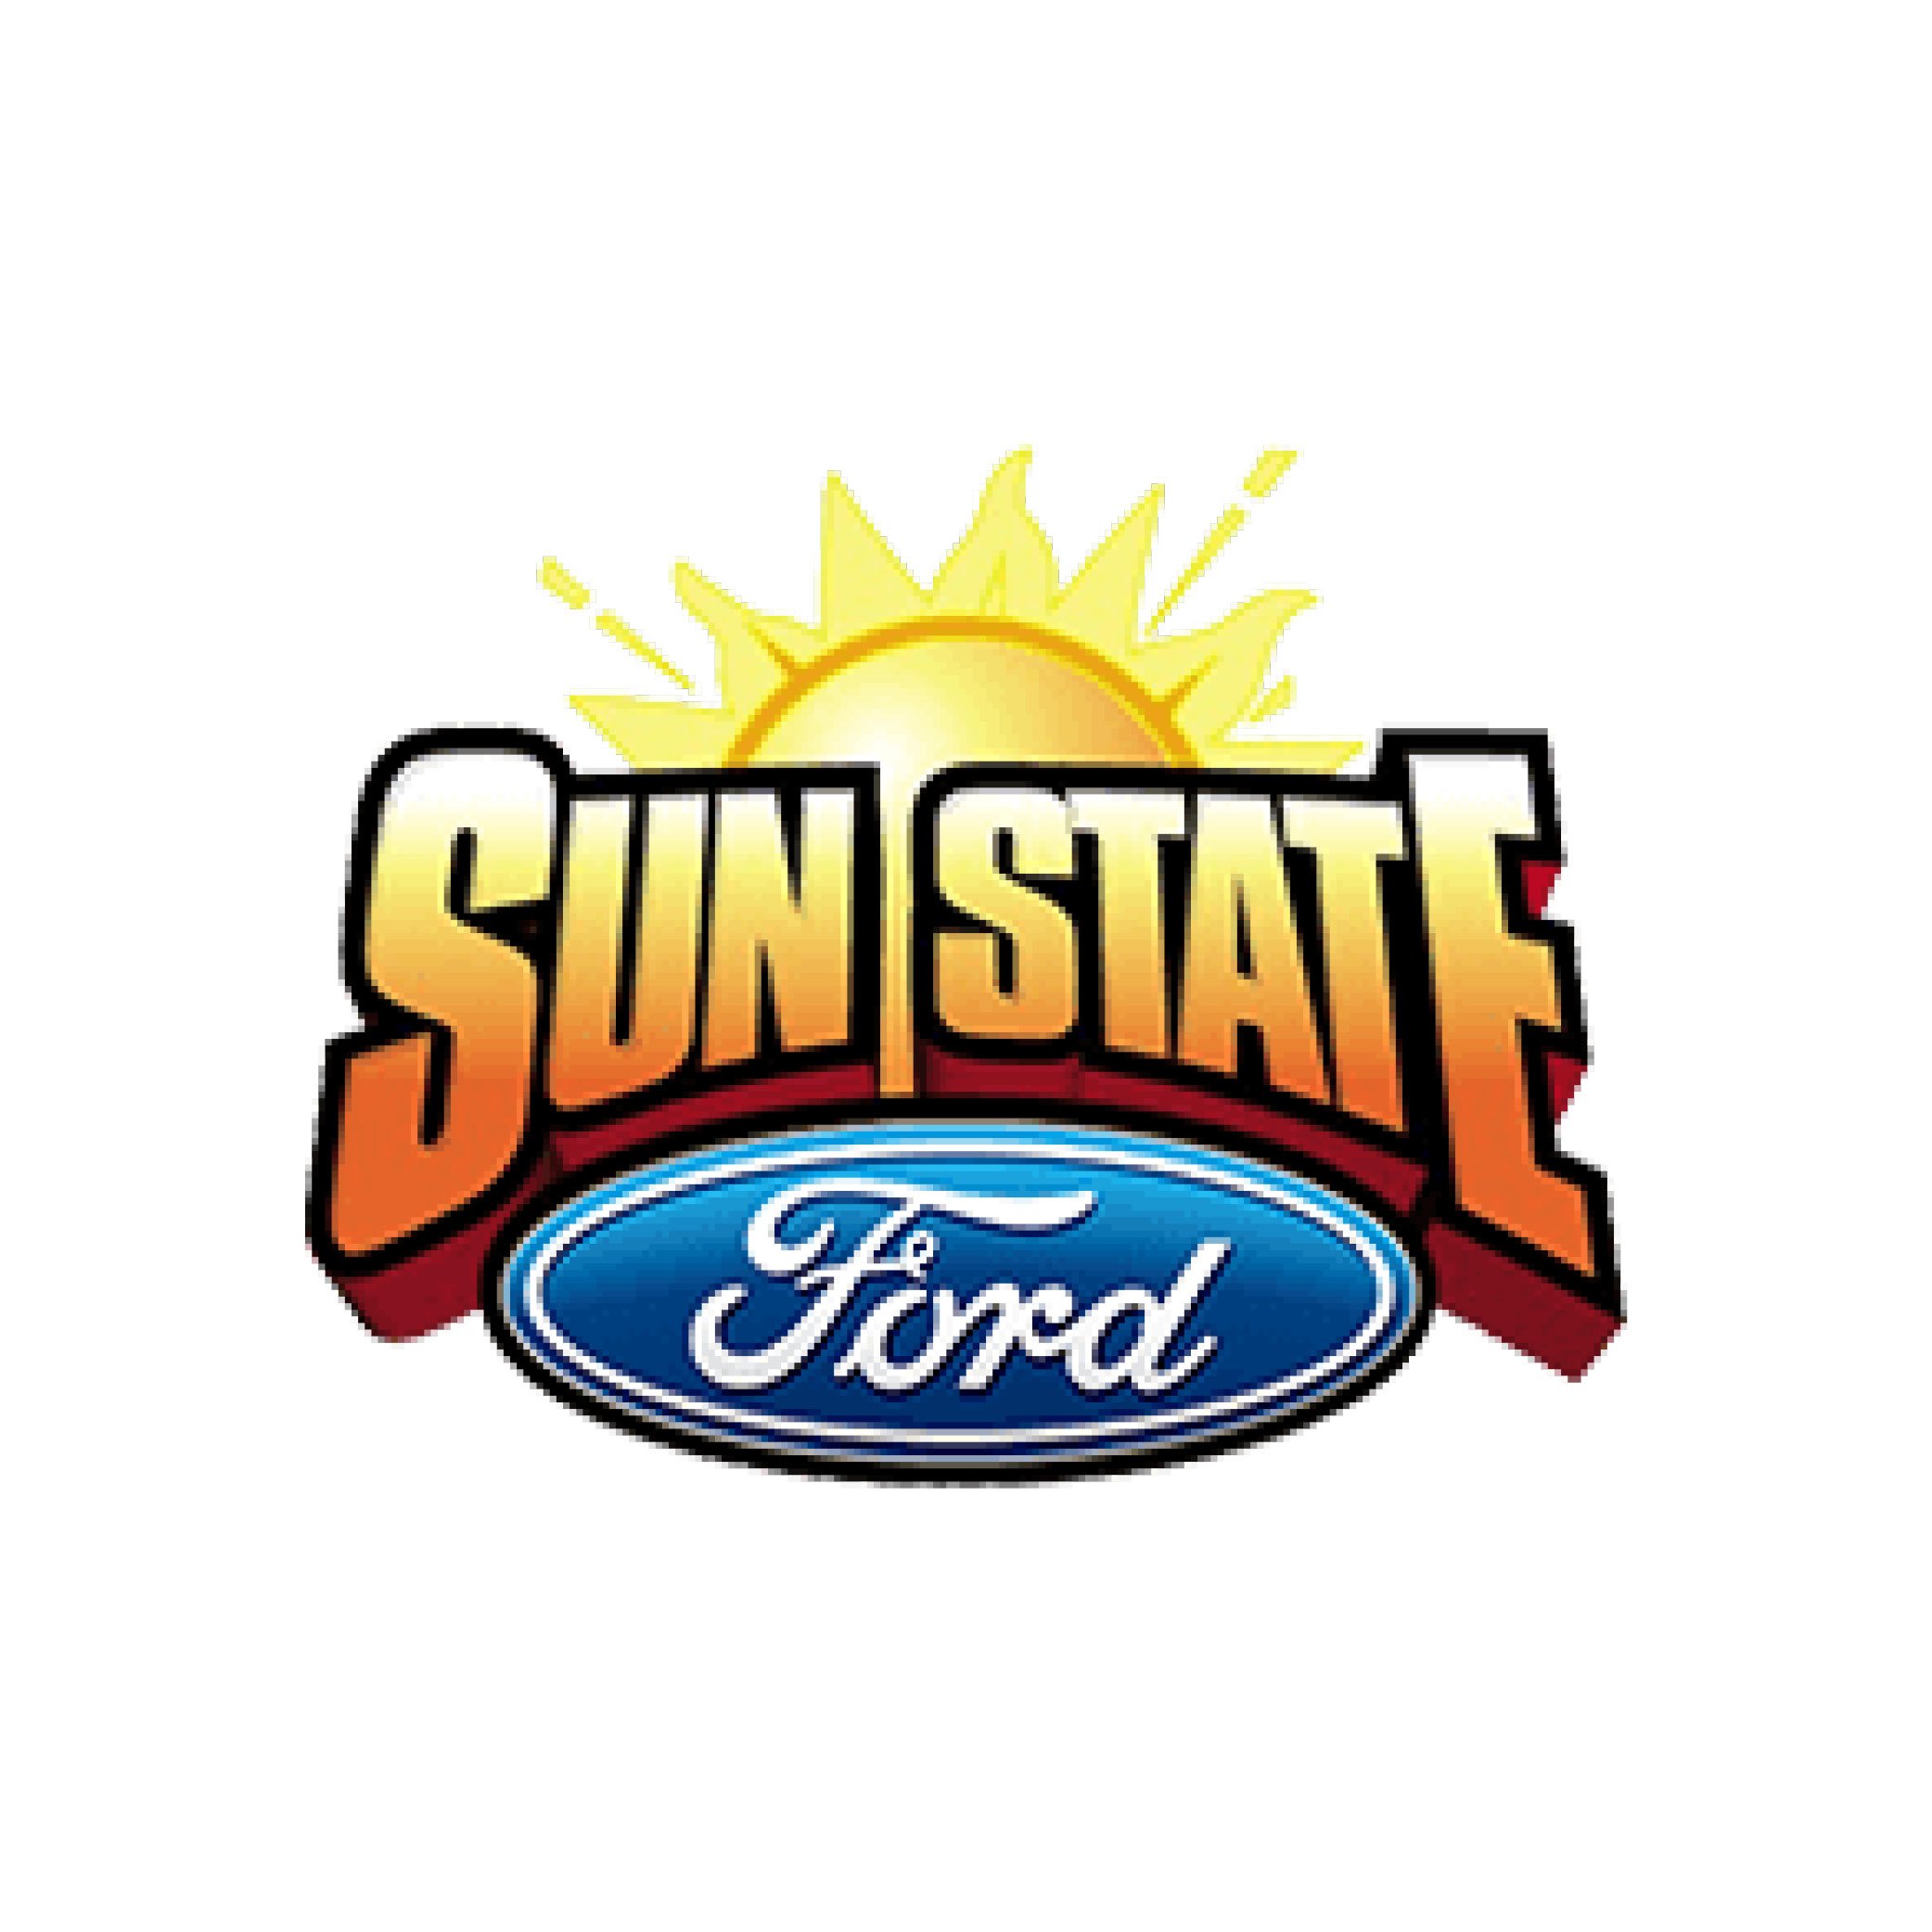 Sun State Ford